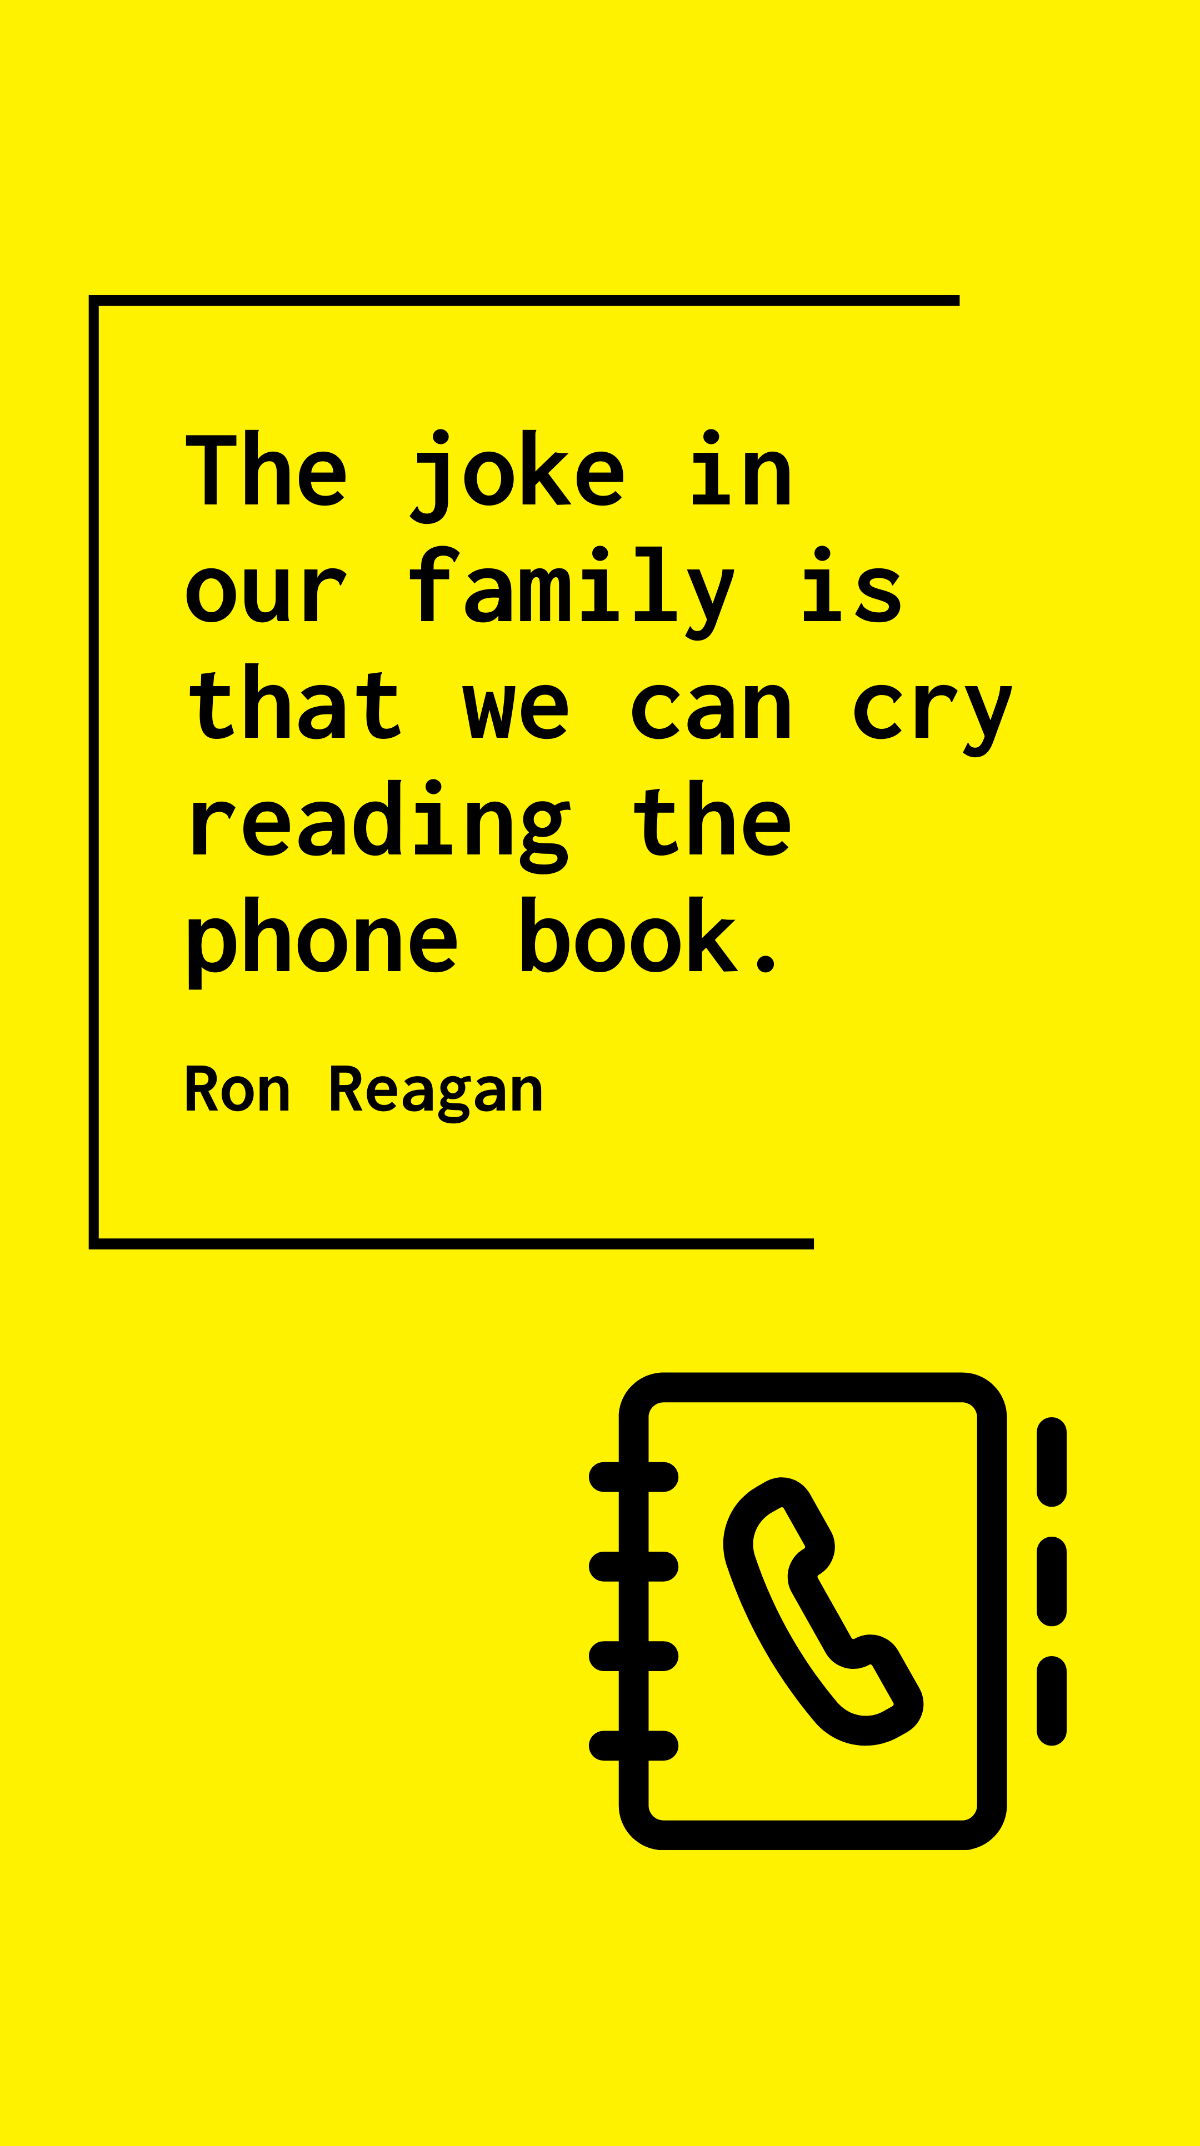 Ron Reagan - The joke in our family is that we can cry reading the phone book. Template